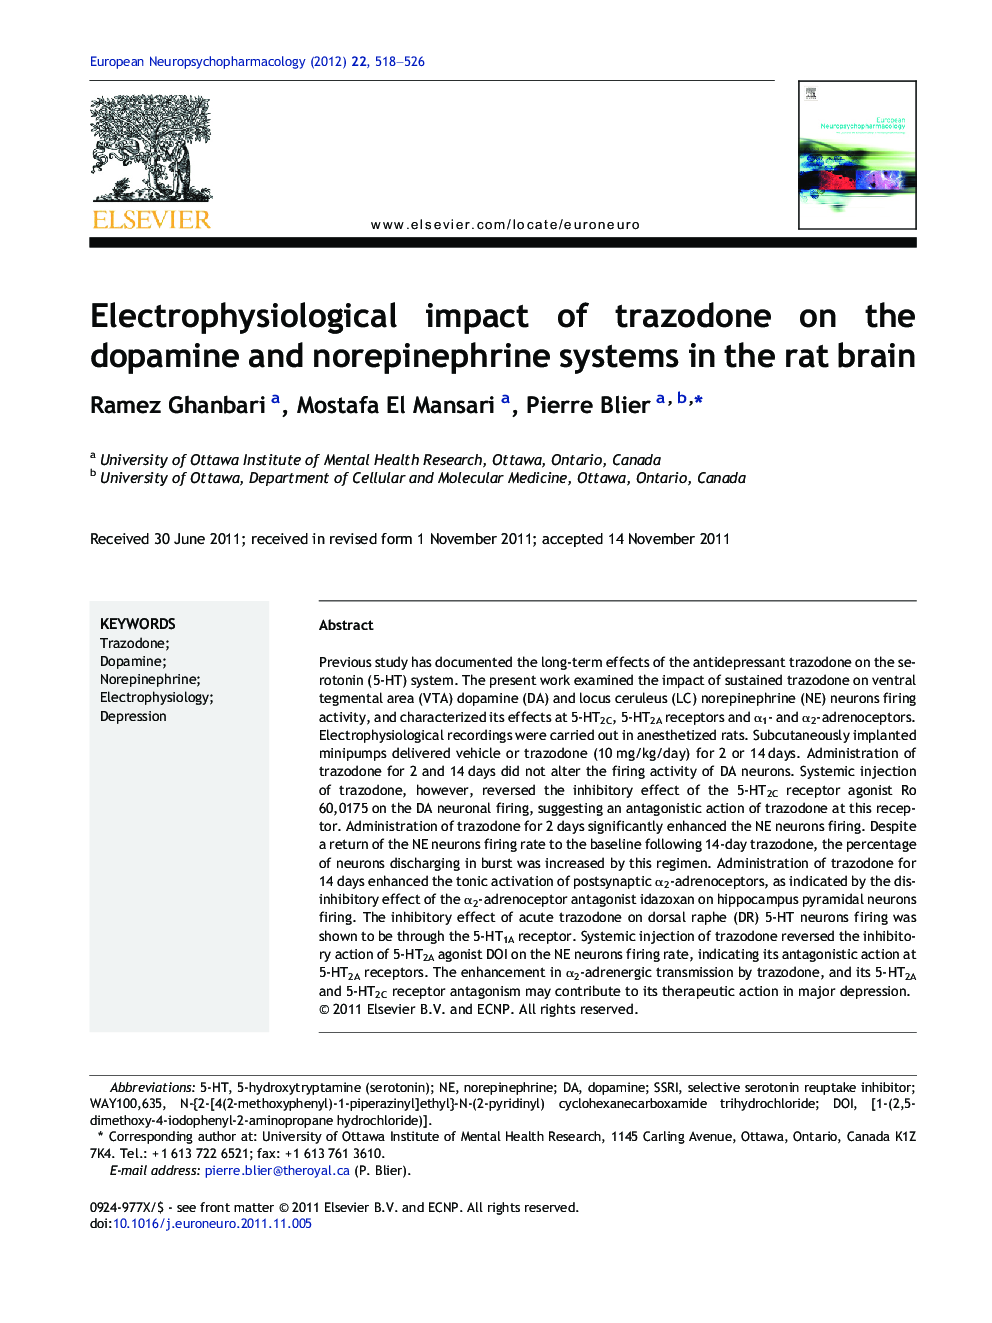 Electrophysiological impact of trazodone on the dopamine and norepinephrine systems in the rat brain